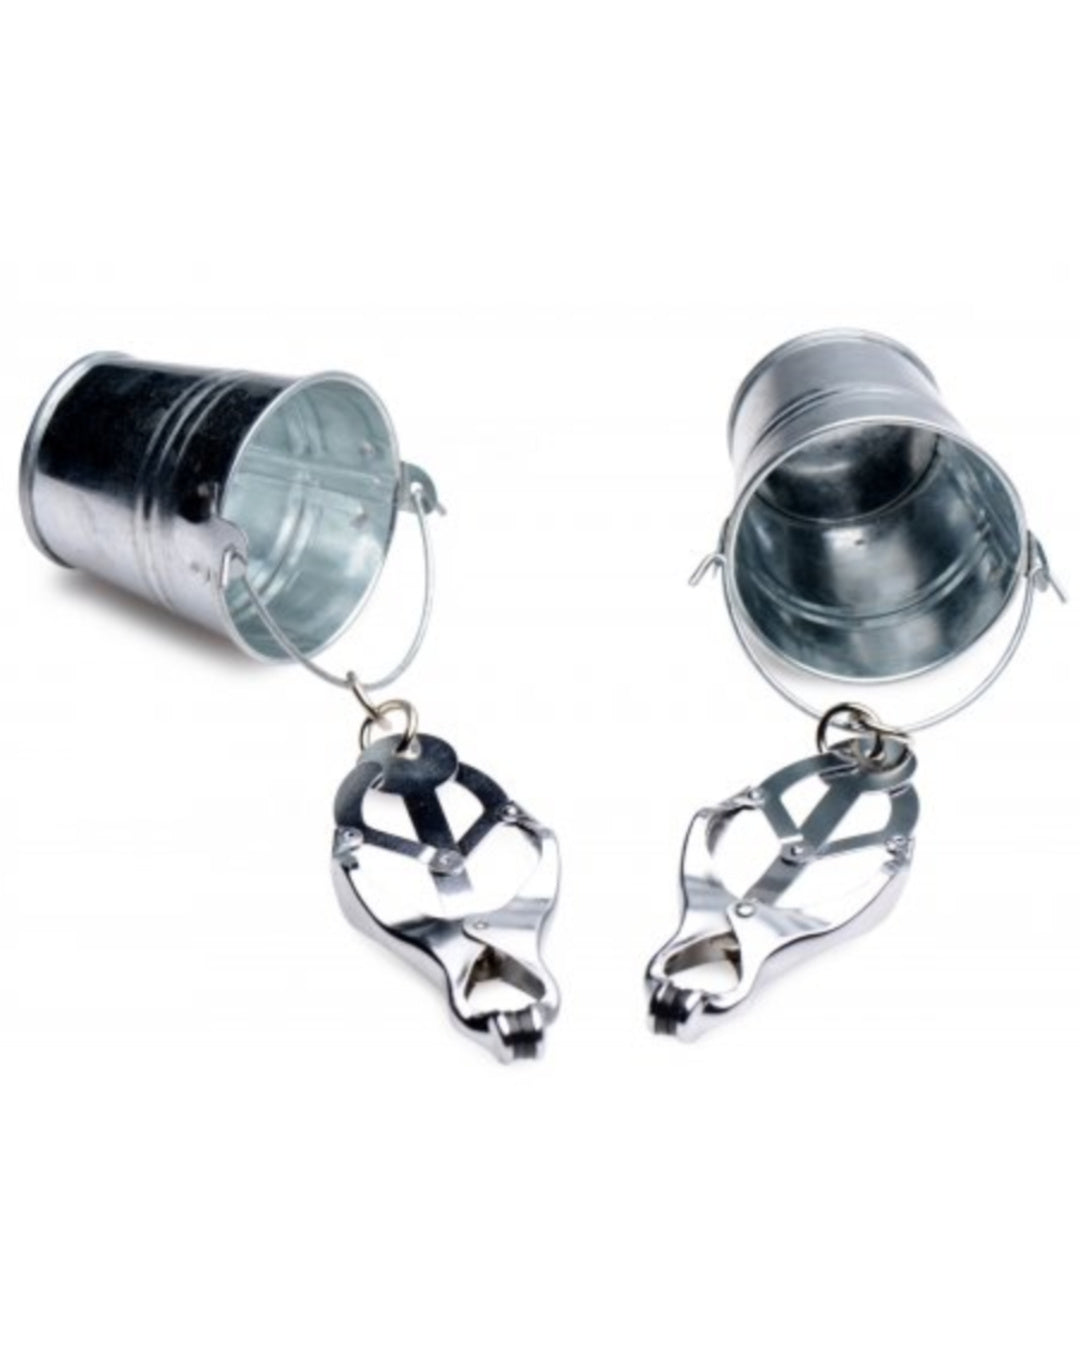 Jugs Nipple Clamps With Stainless Steel Buckets 